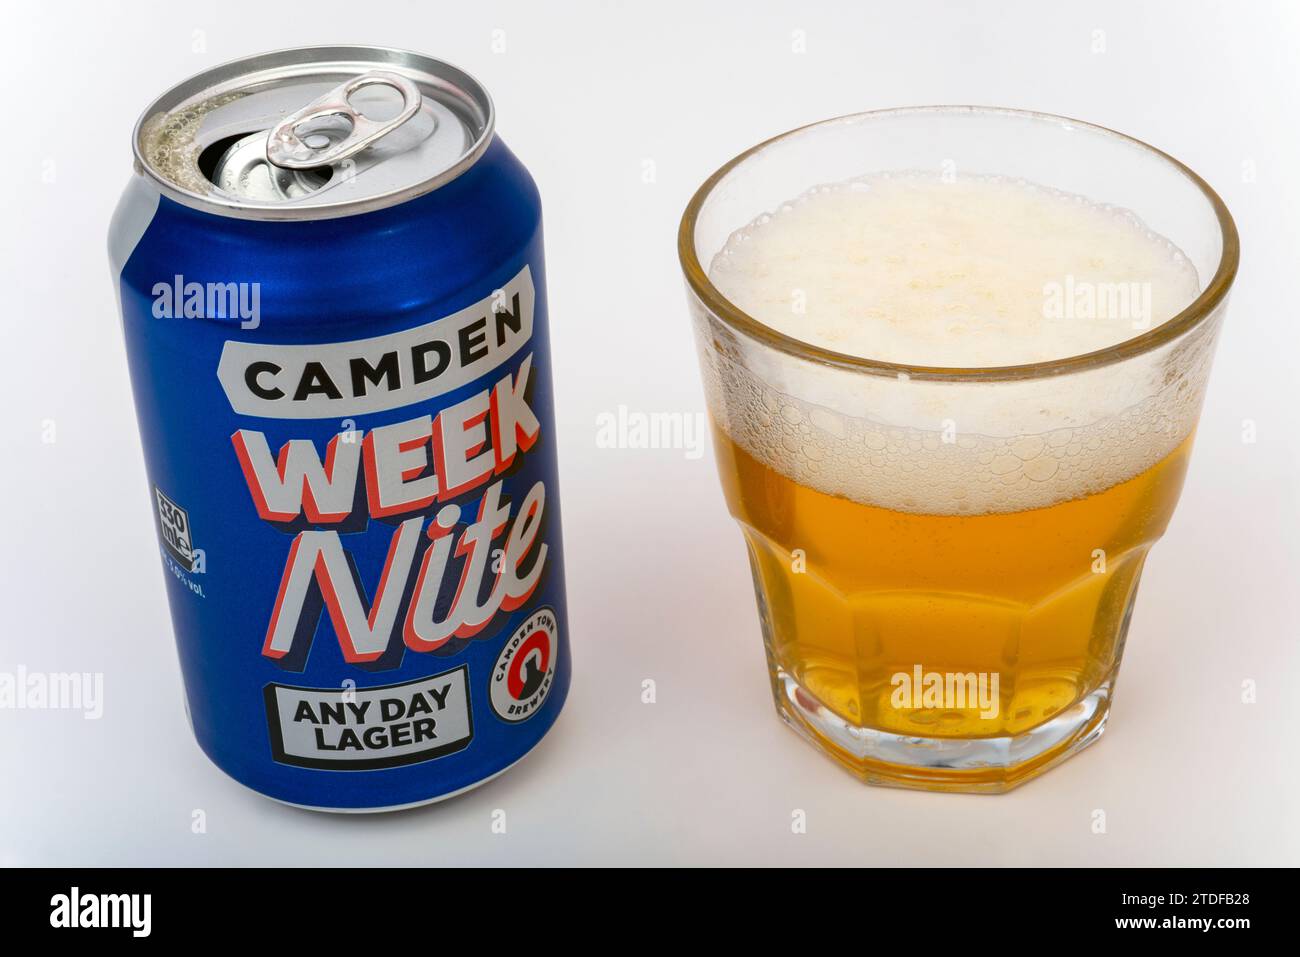 Camden week nite any day lager Stock Photo